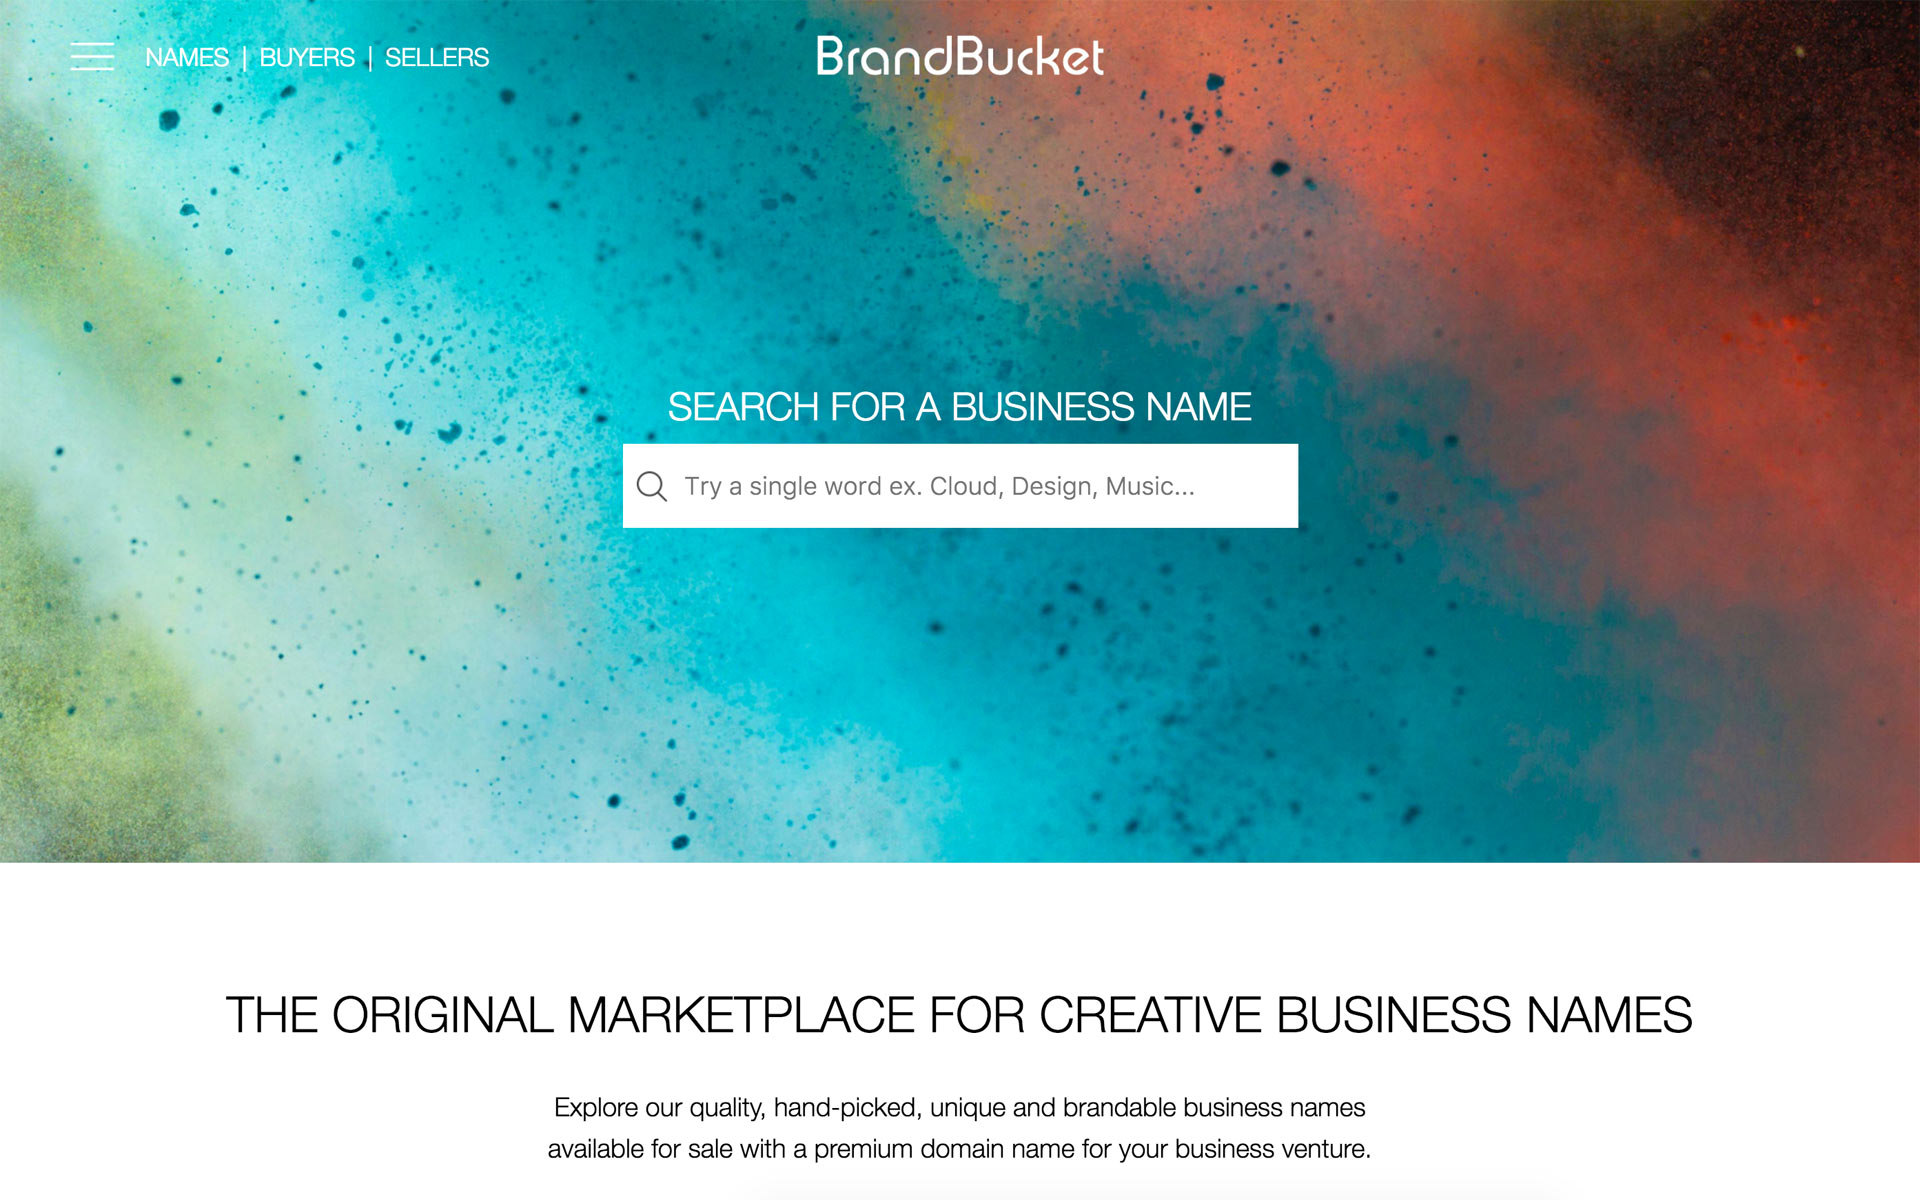 BrandBucket | Find and Buy Creative Business Names